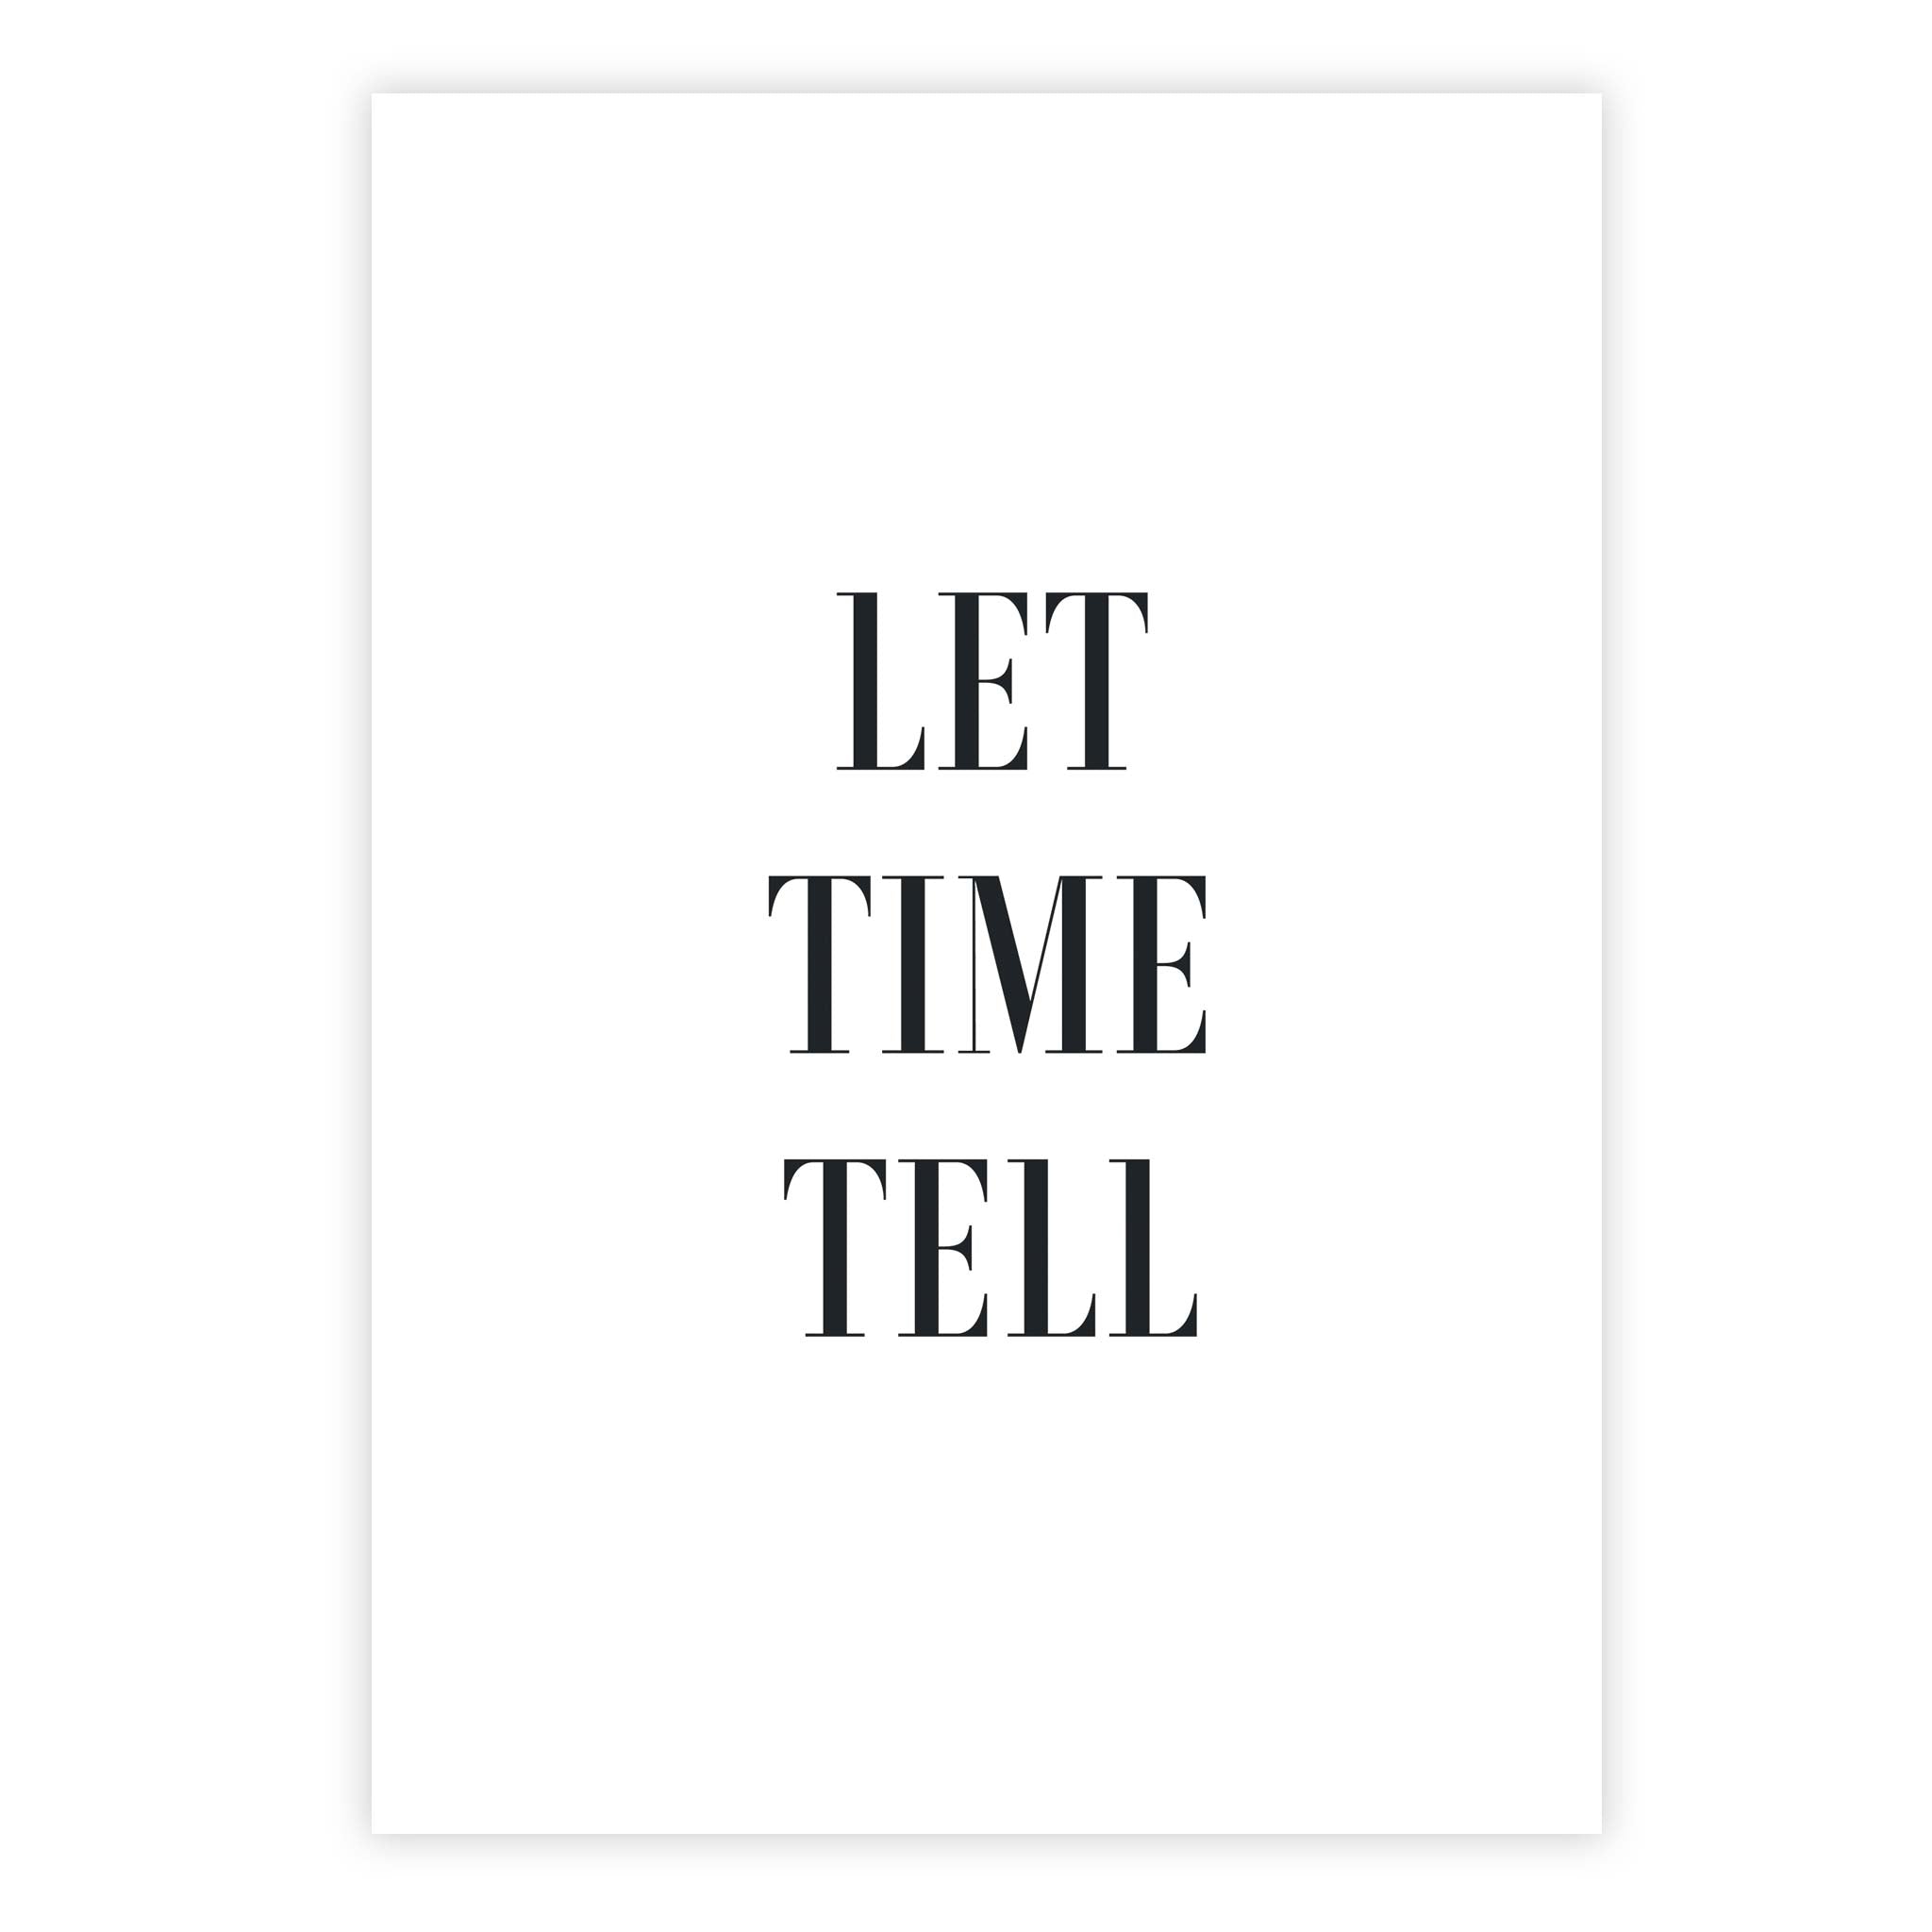 Let time tell